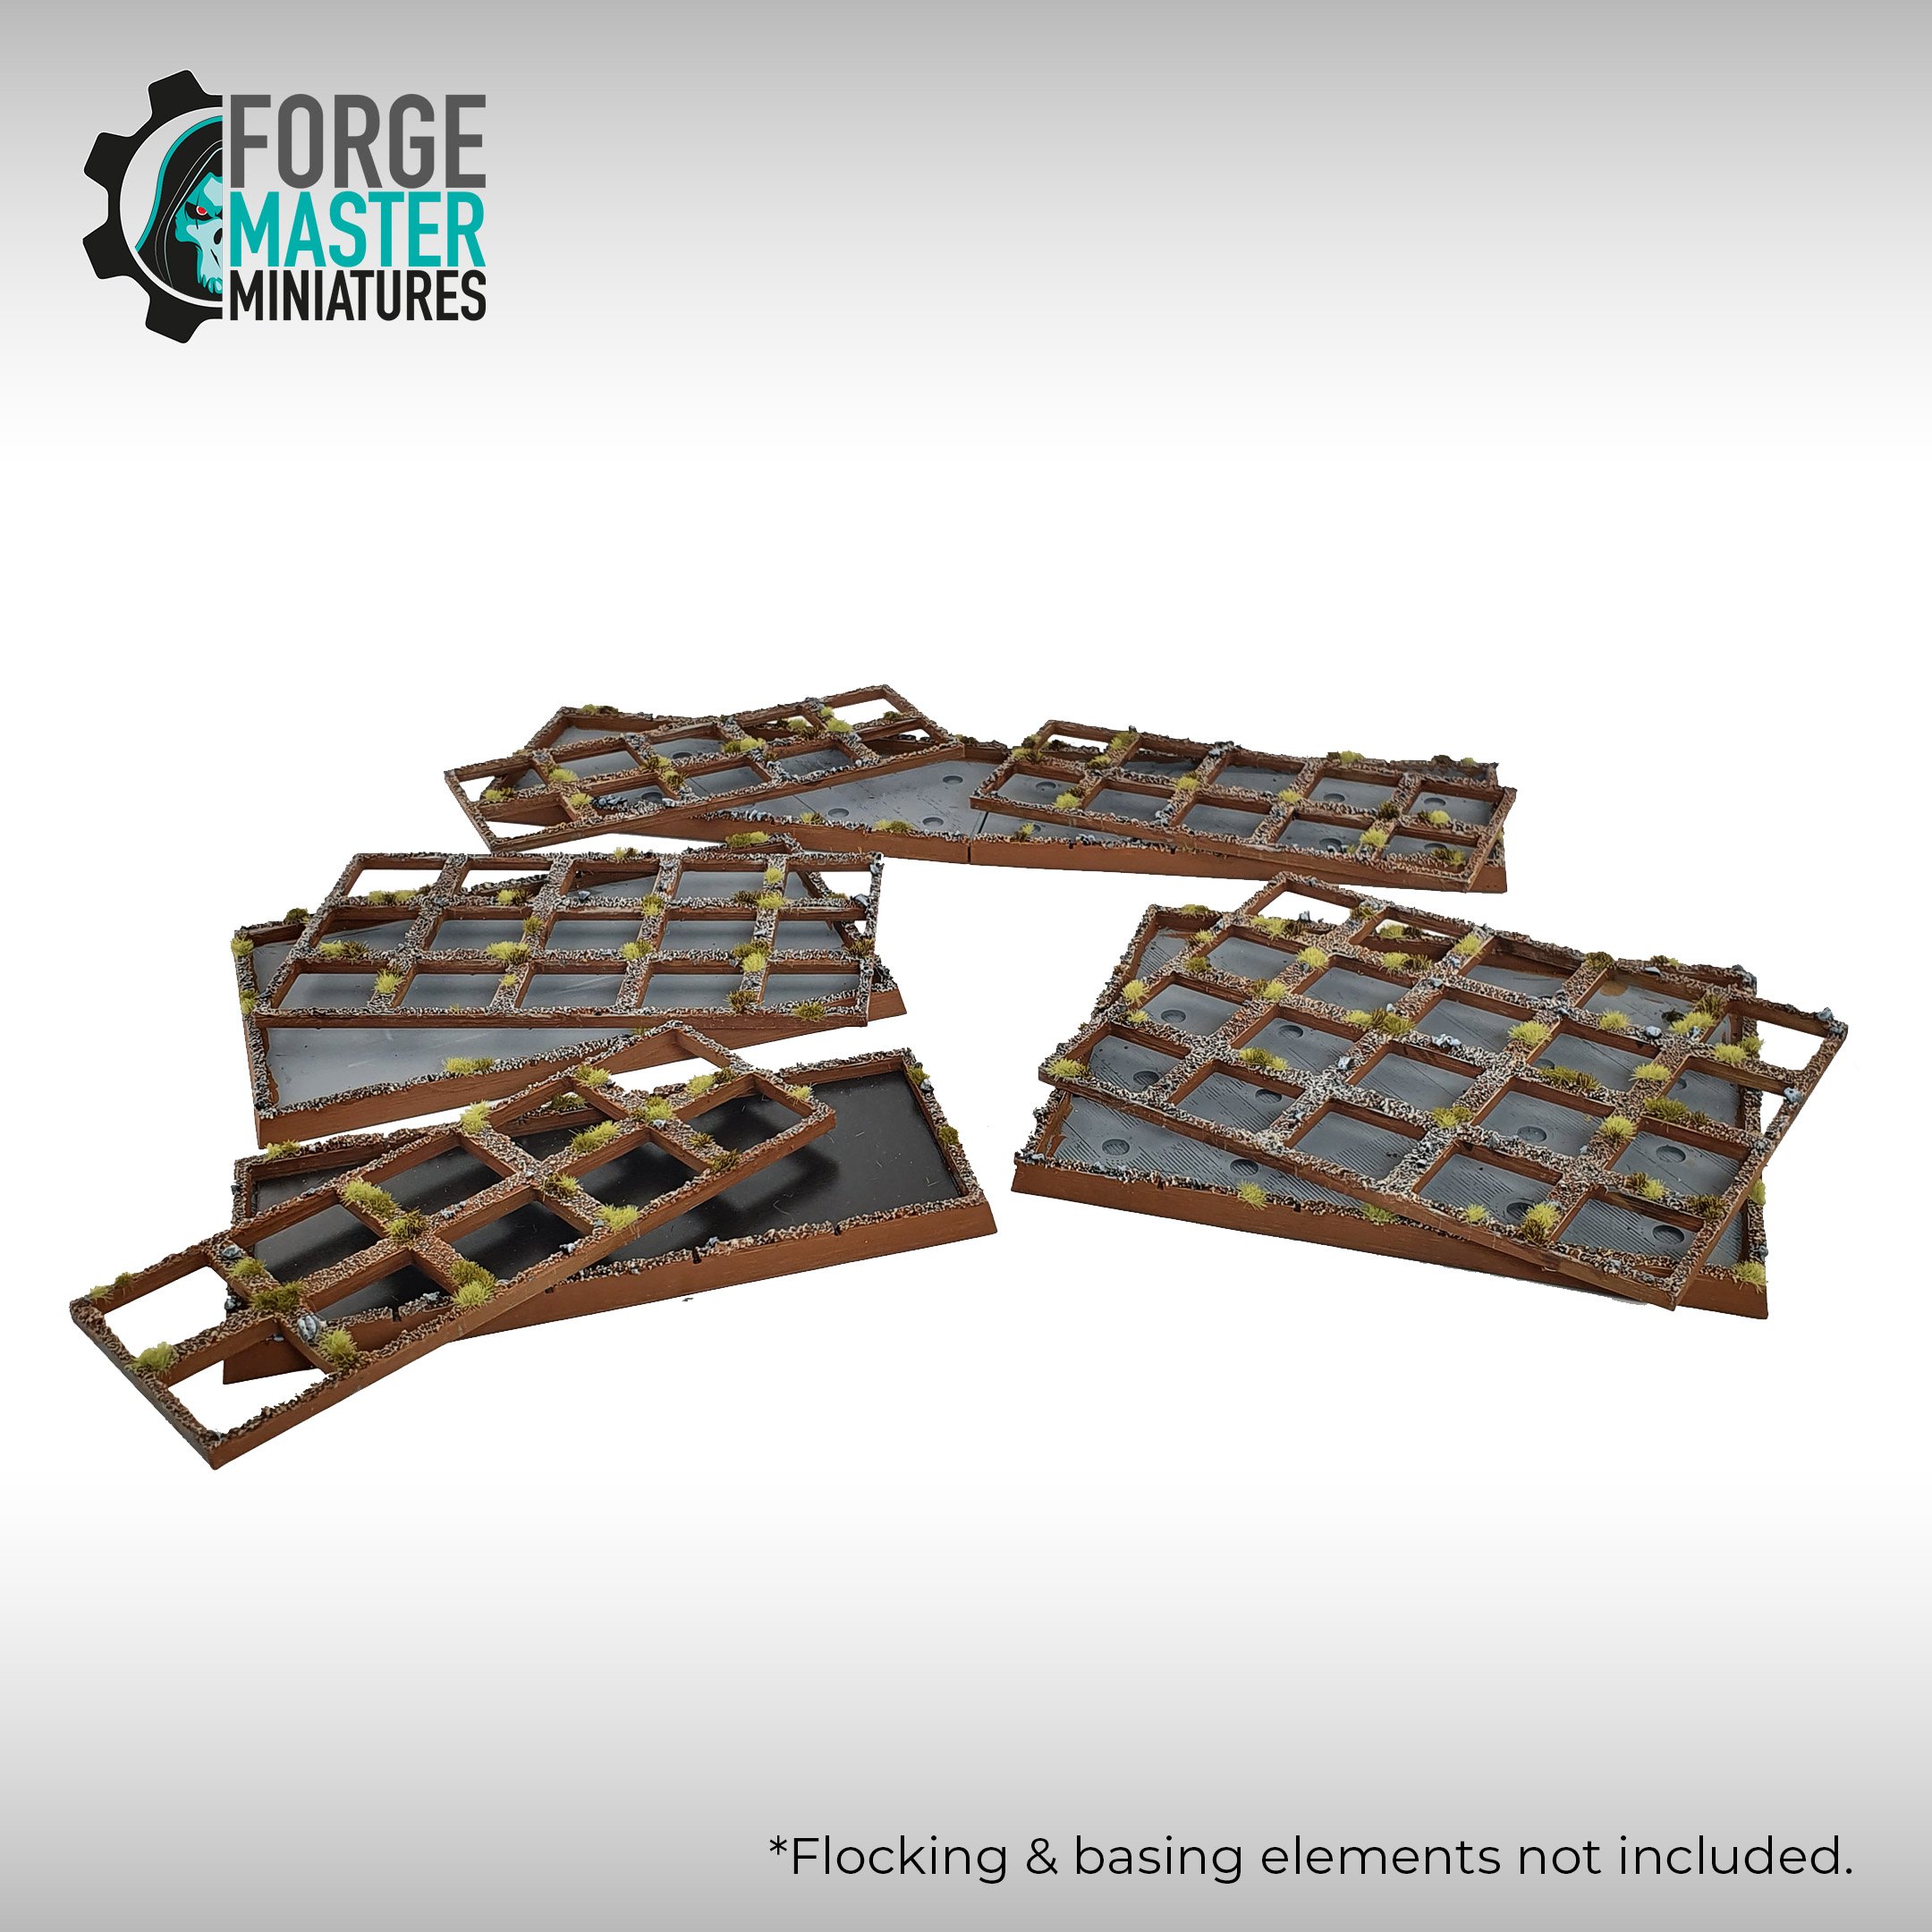 Forgemaster Miniatures movement trays with base adaptors for wargaming and warhammer